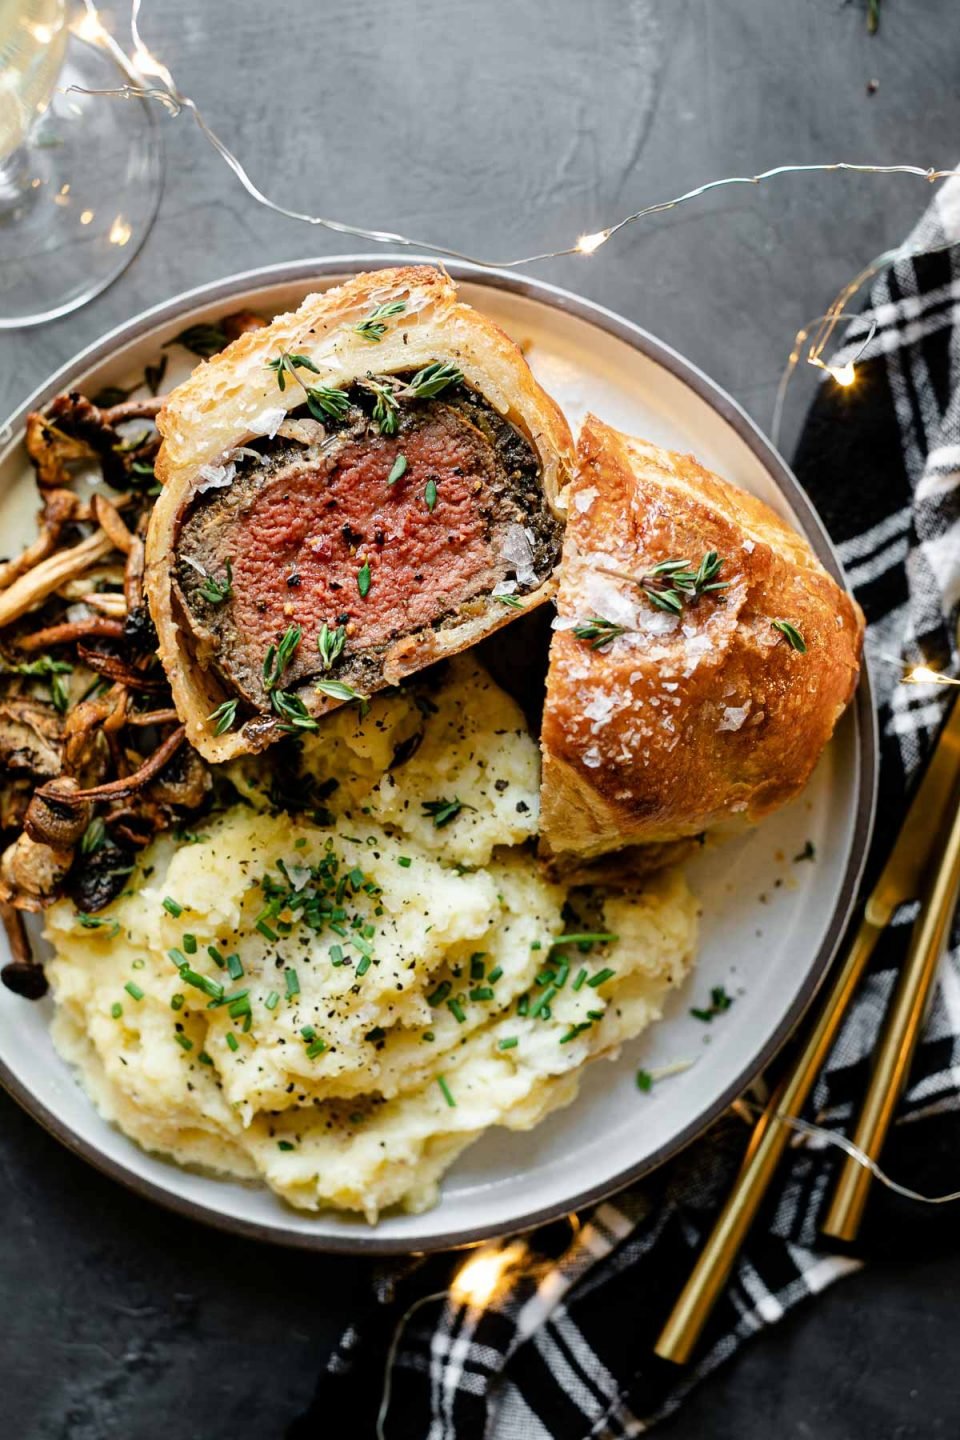 Individual Beef Wellington, cut in half, one half facing up, on a white ceramic plate, served with mashed potatoes and roasted mushrooms. The plate is on a black surface, next to a black plaid linen napkin, gold flatware, a glass of wine and twinkly lights.